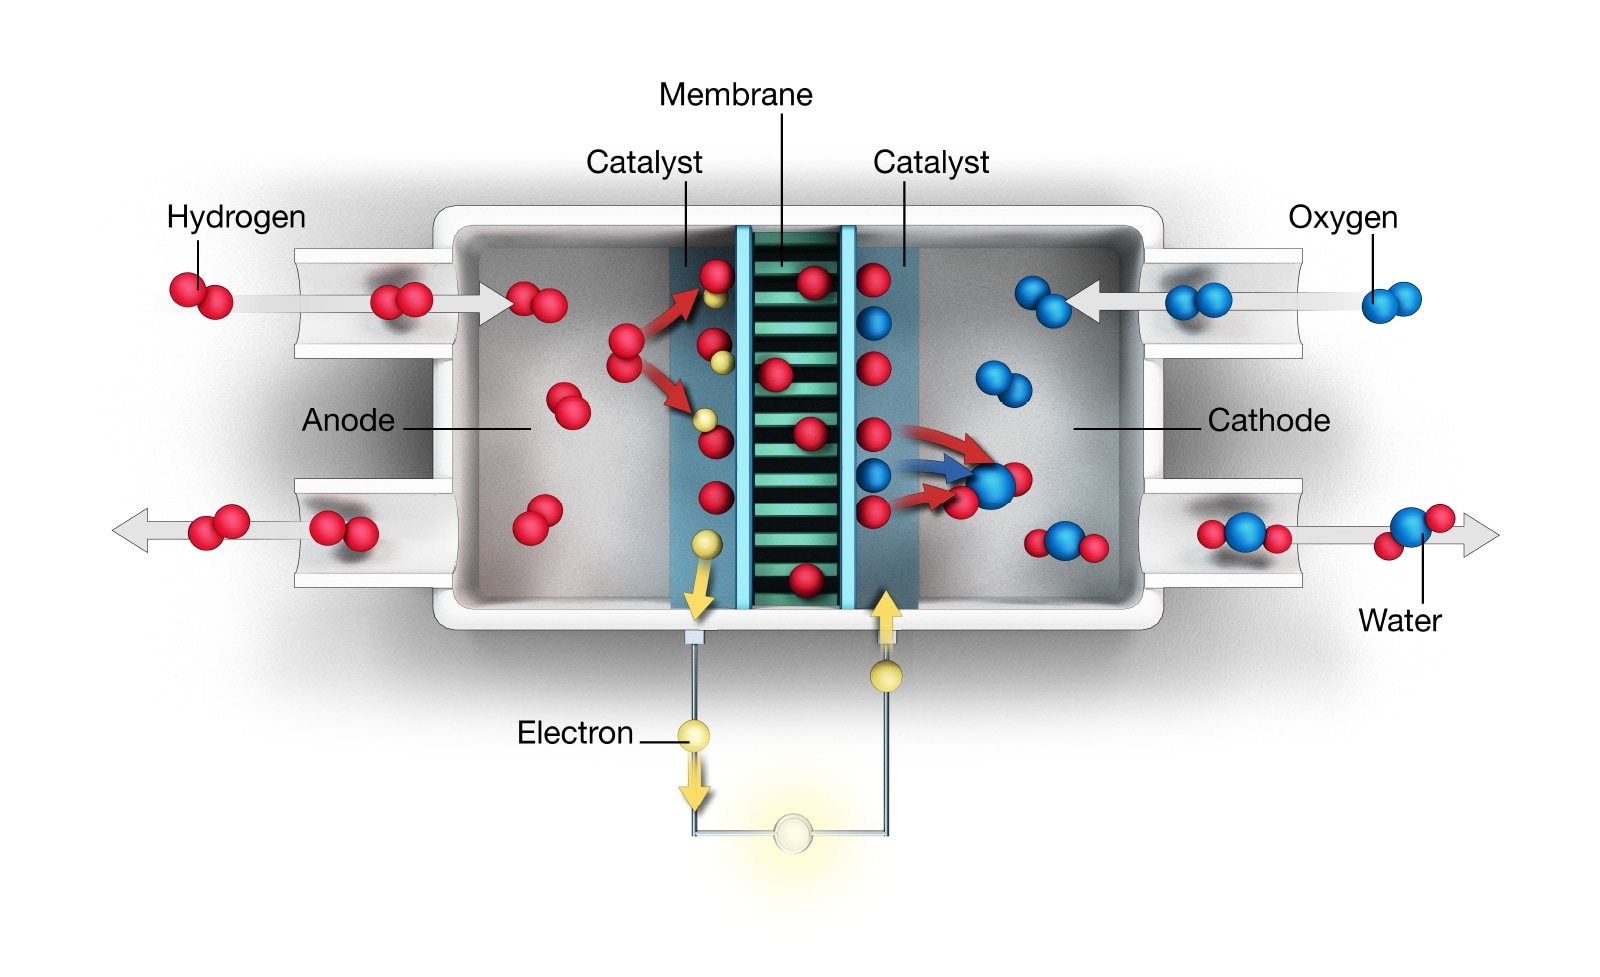 A schematic illustration of a hydrogen fuel cell. Hydrogen nuclei (pairs of red spheres) are separated from their electrons (yellow spheres). The flow of electrons generates an electric current, which powers the car. The hydrogen nuclei pass through a membrane (centre) and then combine with the electrons and oxygen (blue) from the air to form steam. Water is the only waste product.